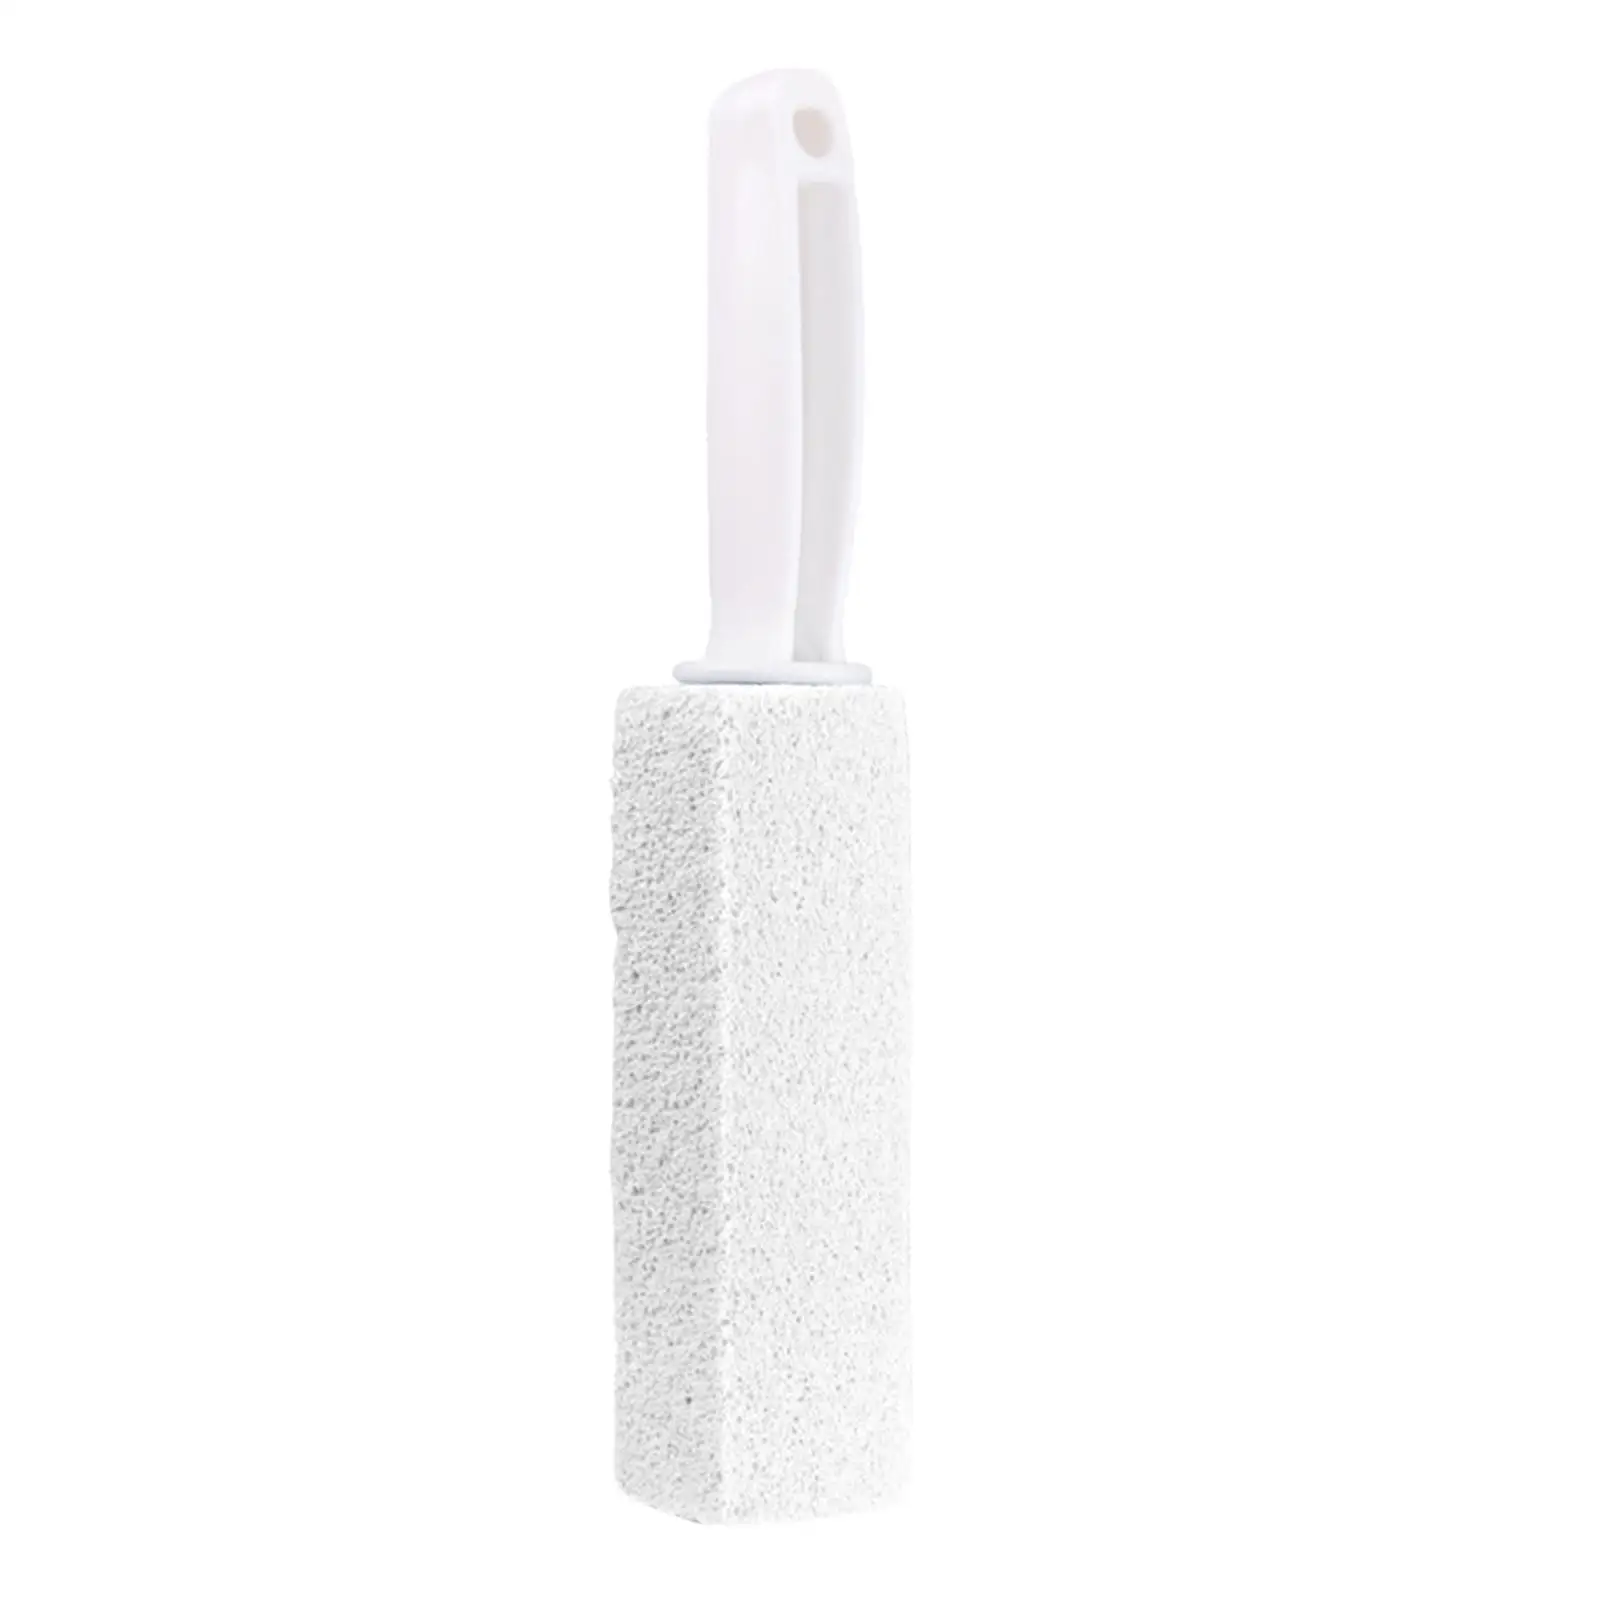 Pumice Stone Toilets Brush Quick Cleaning Stone for Household Cleaning